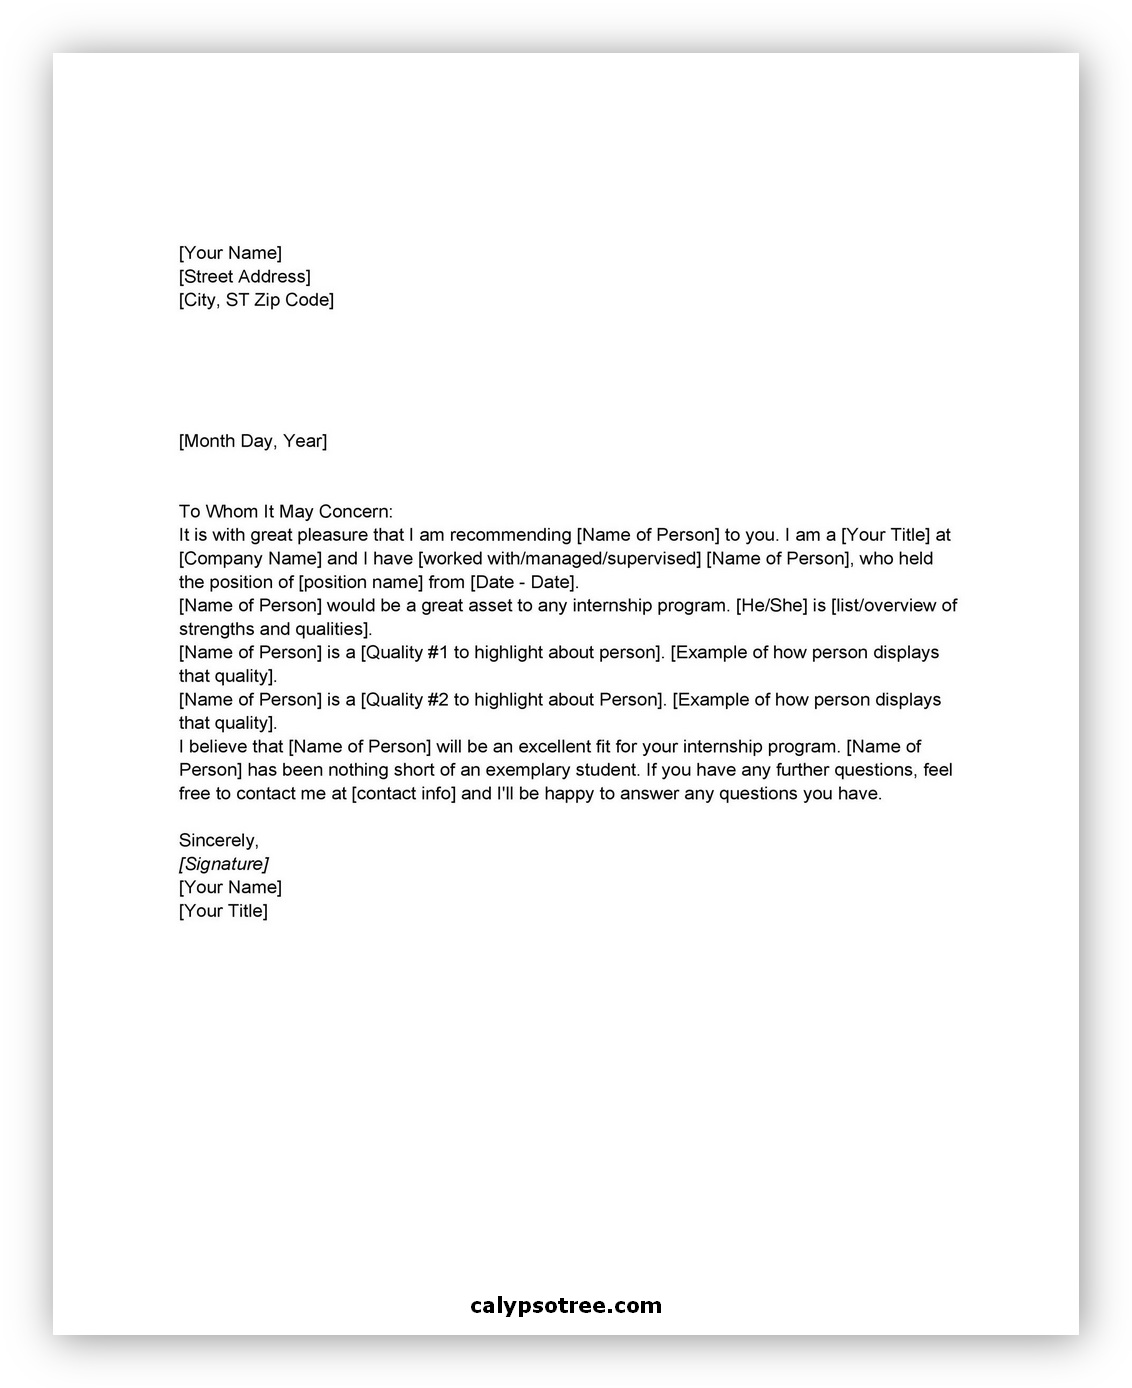 Letter of Recommendation Format 05